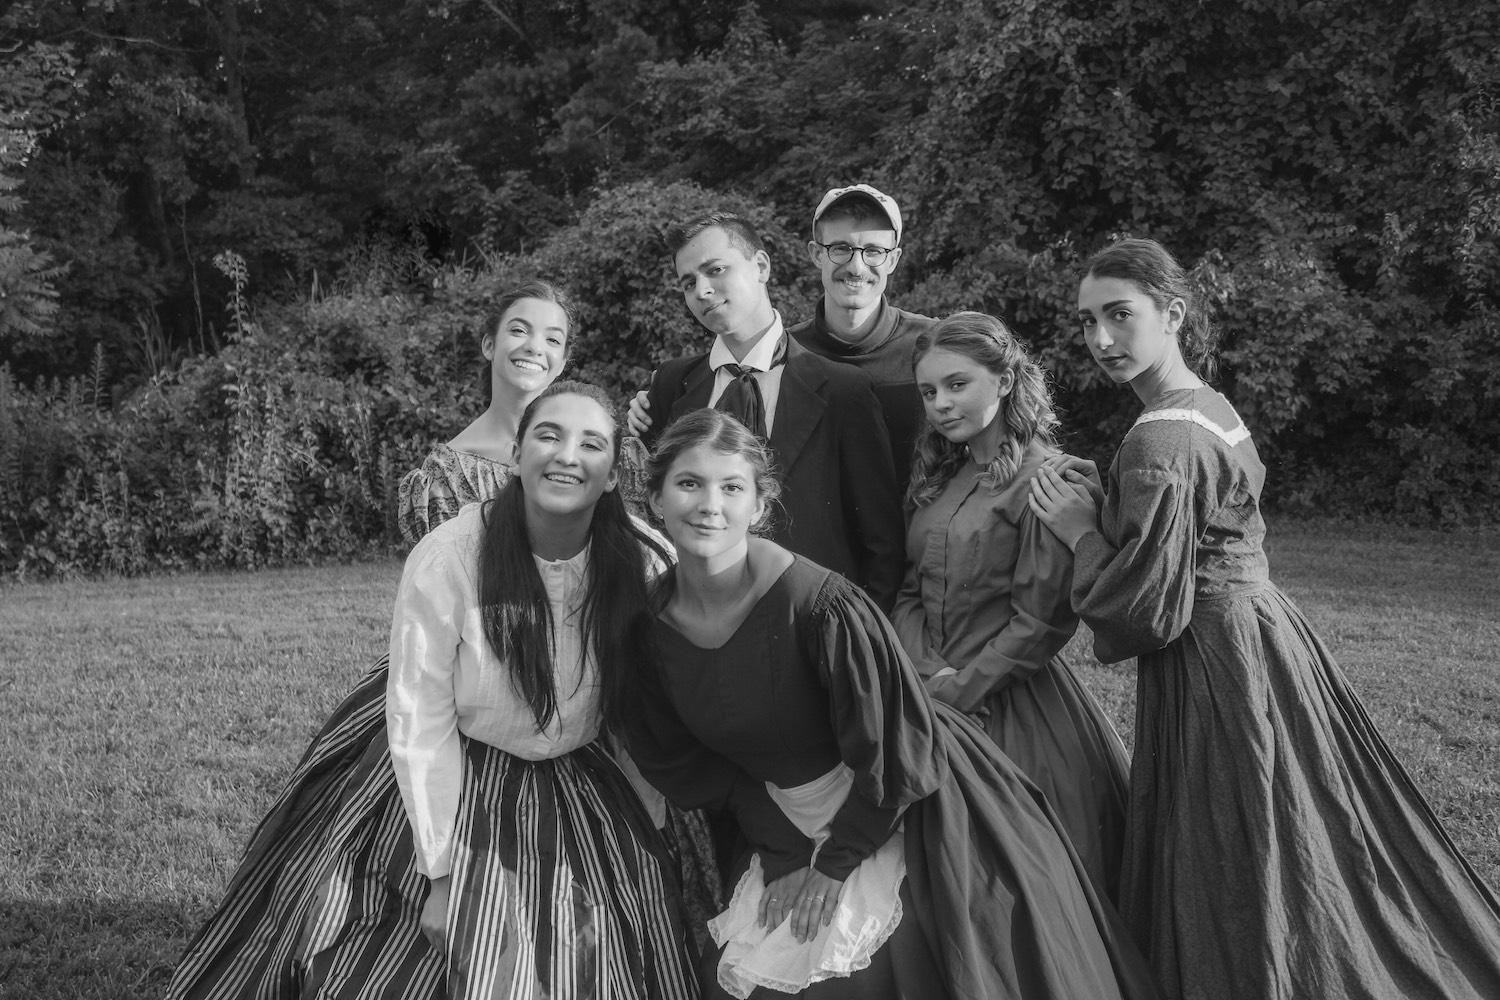 Gallery 4 - The cast of “Little Women,” from left, Meg March (Hannah Elliot), Beth March (Taylor Litofsky), Jo March (Emily Alvarado), Amy March (Alyssa Herman), Marmee March (Emma Higgins) and Laurie Lawrence (Ben Simon), and Director Gavin Kramar.